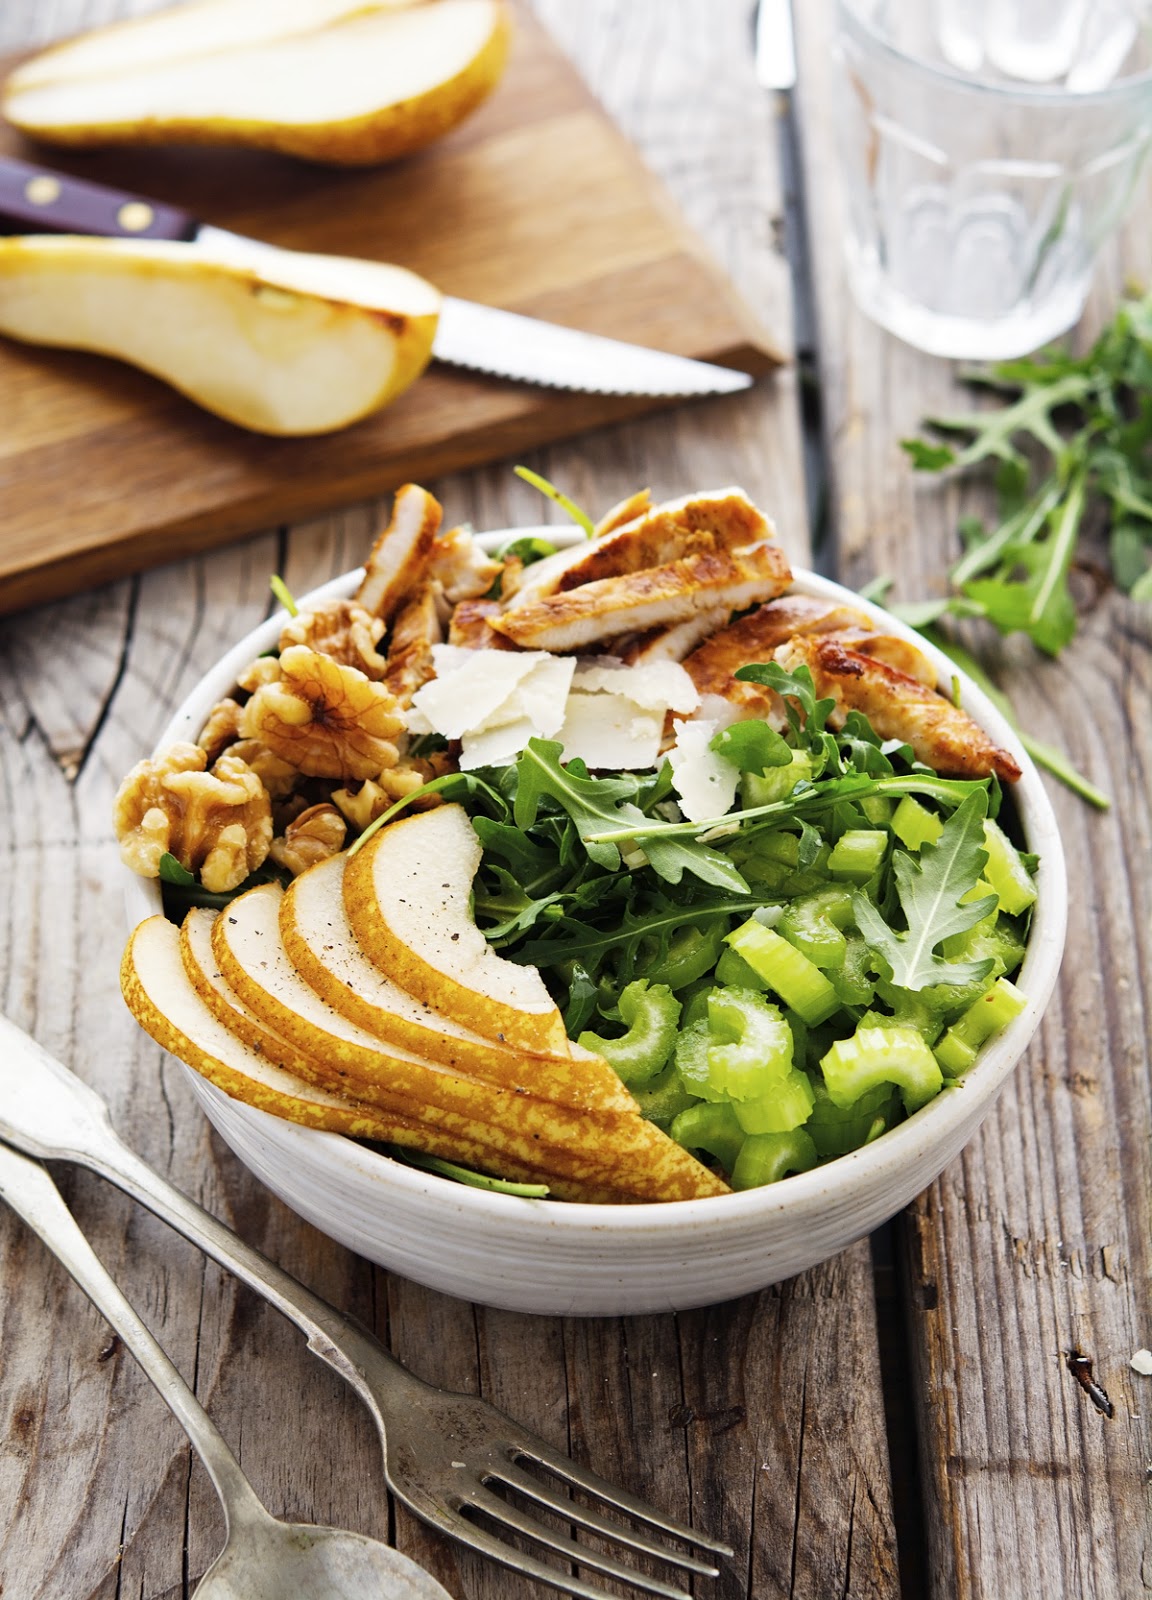 Grilled Chicken Arugula and Pear Salad with Toasted Walnuts